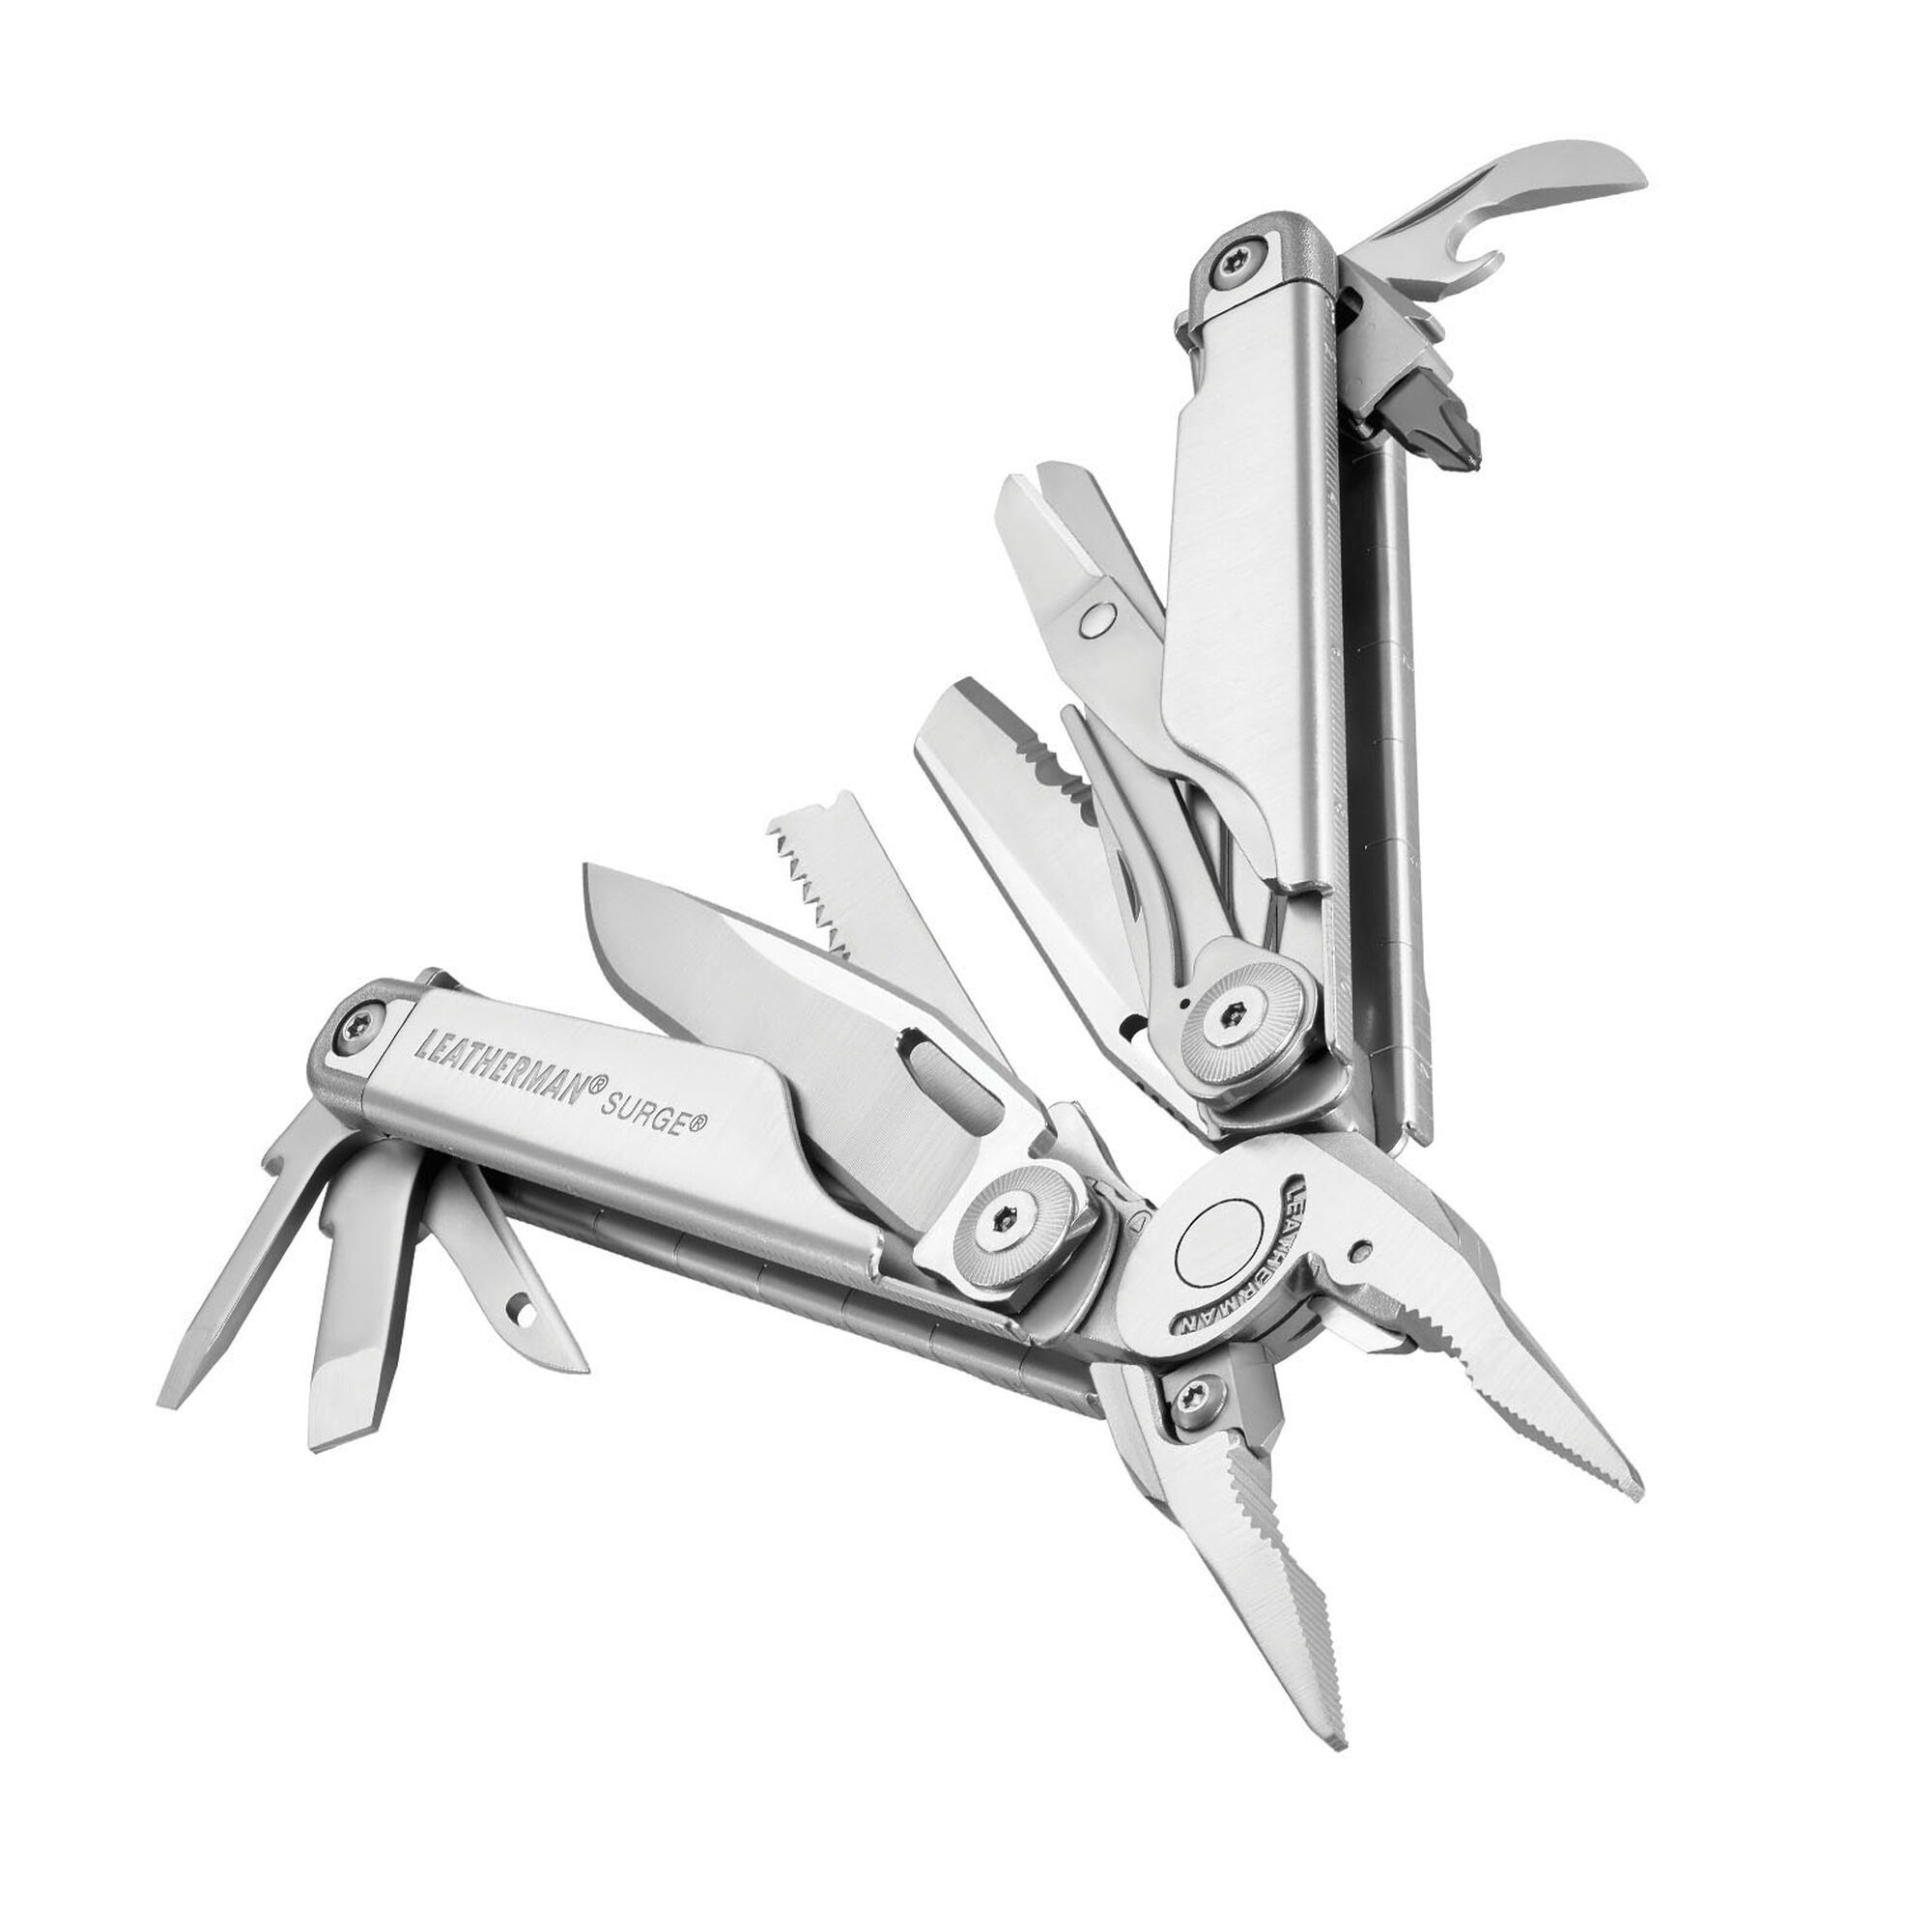 Leatherman ARC - All Your Questions Answered - Knife Life